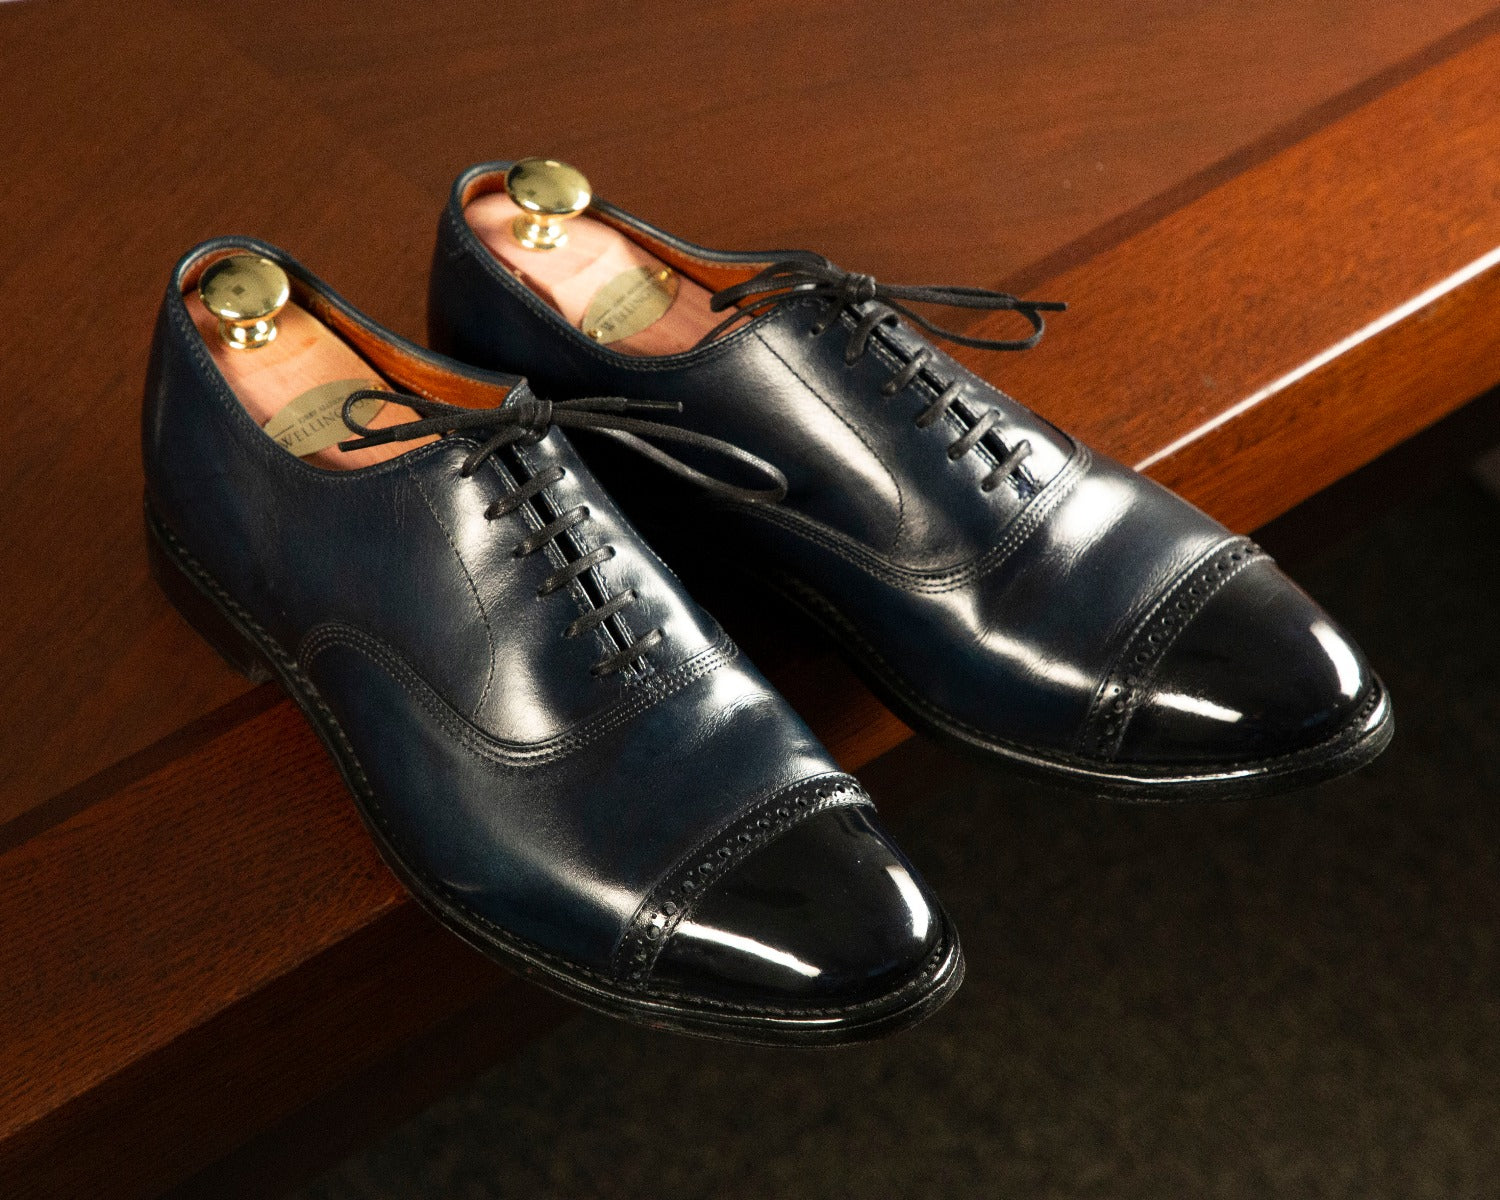 A pair of blue oxford shoes on a wooden table, showcasing the Presidential Shoe Shine Service by KirbyAllison.com.